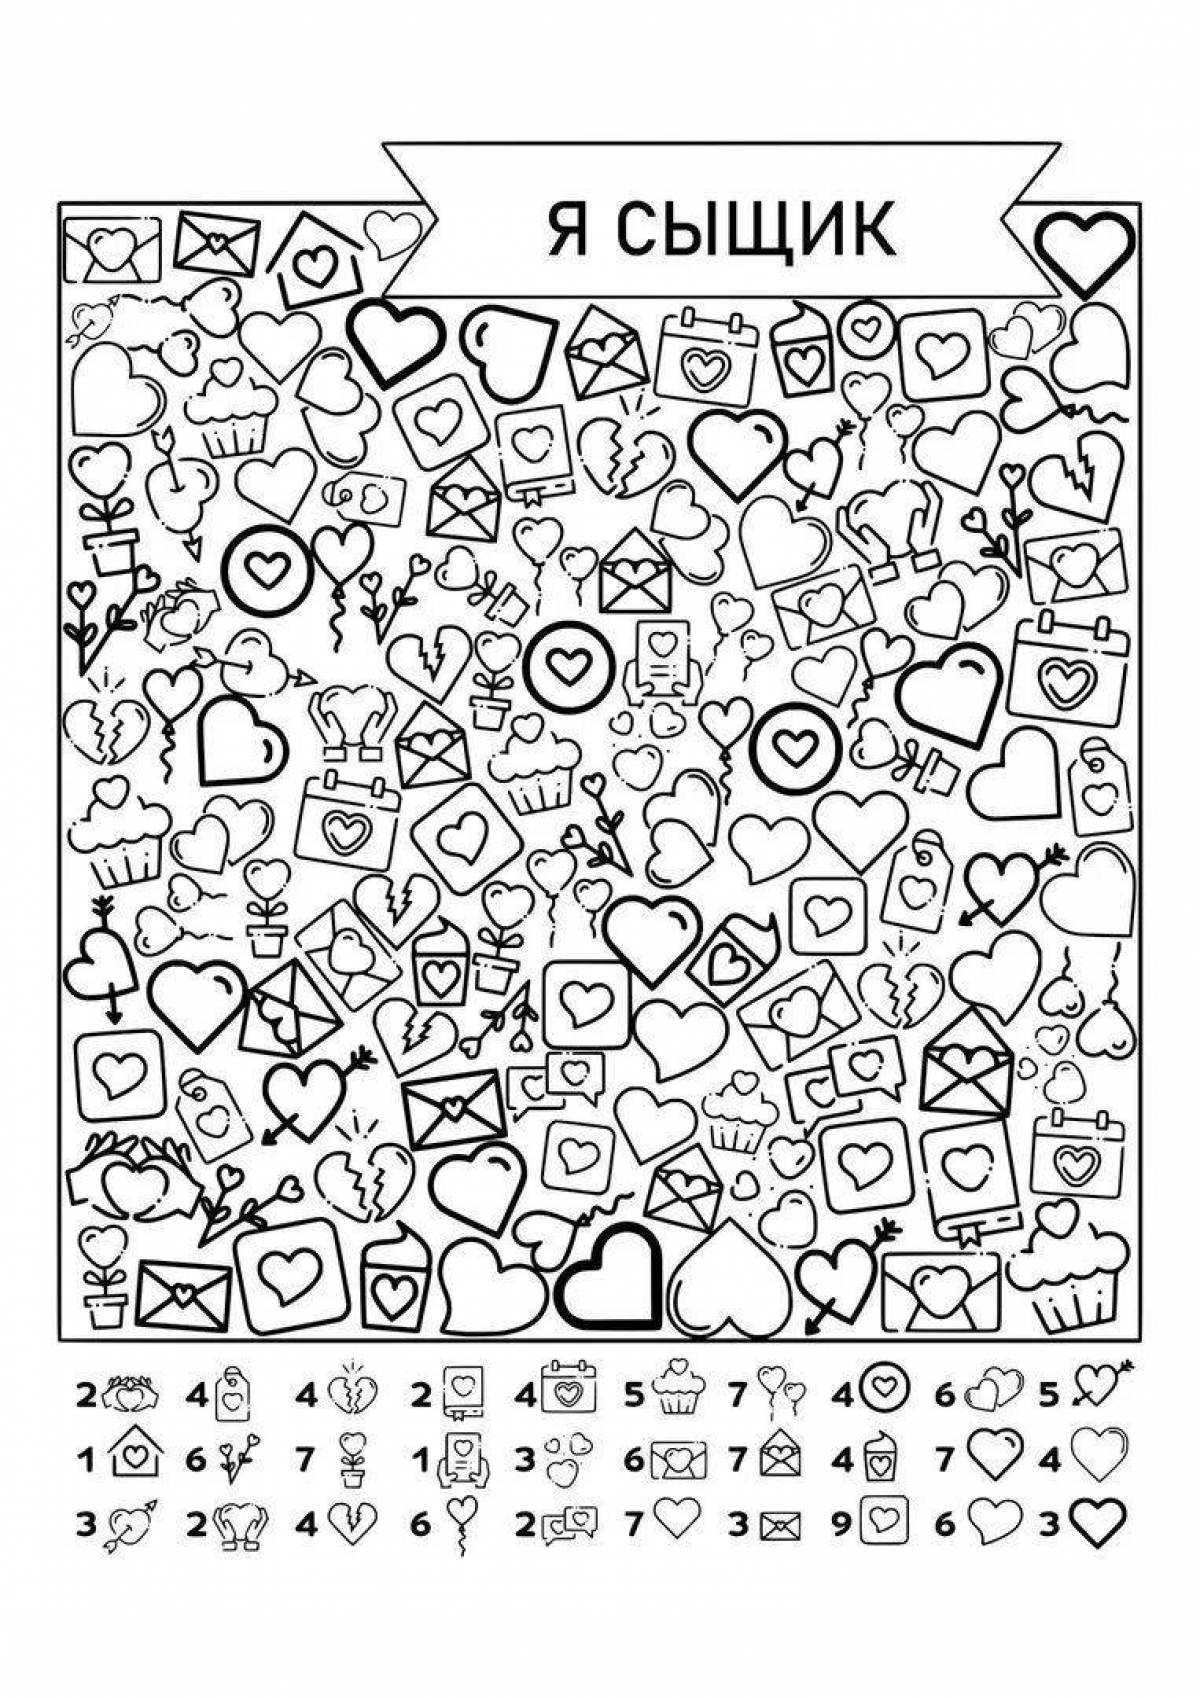 Relaxing mindfulness coloring pages